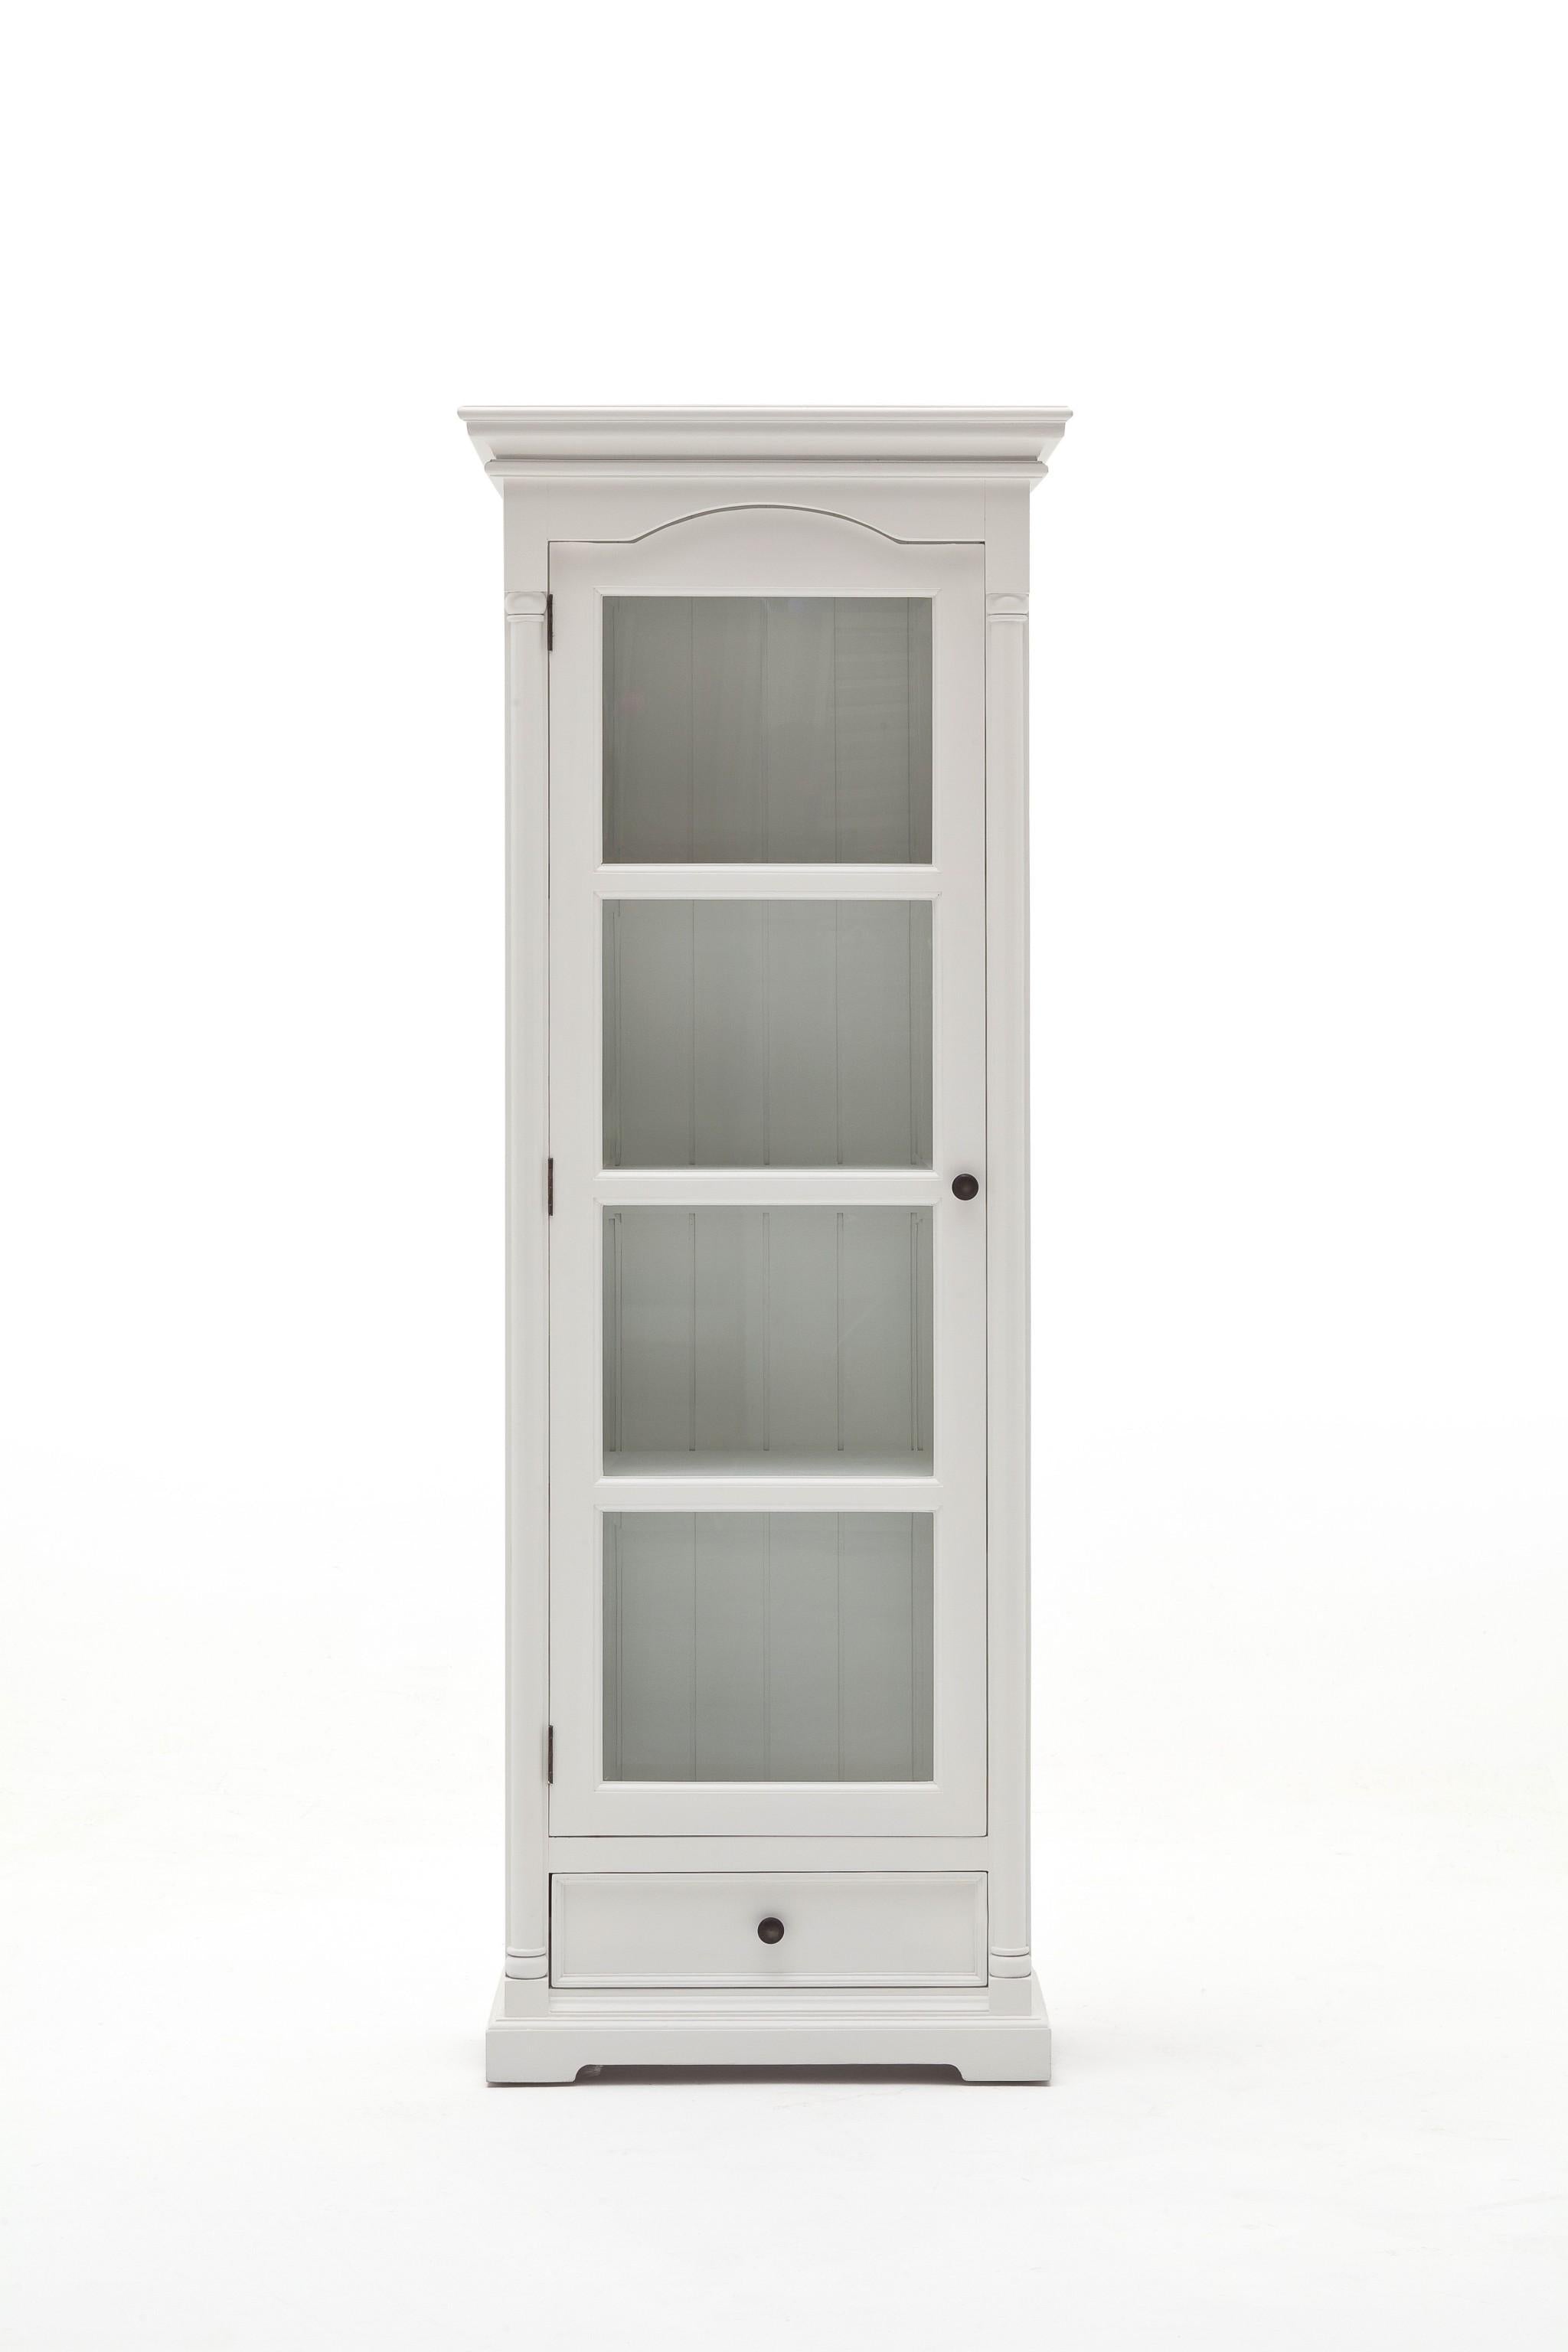 Traditional White and Glass Door Storage Cabinet